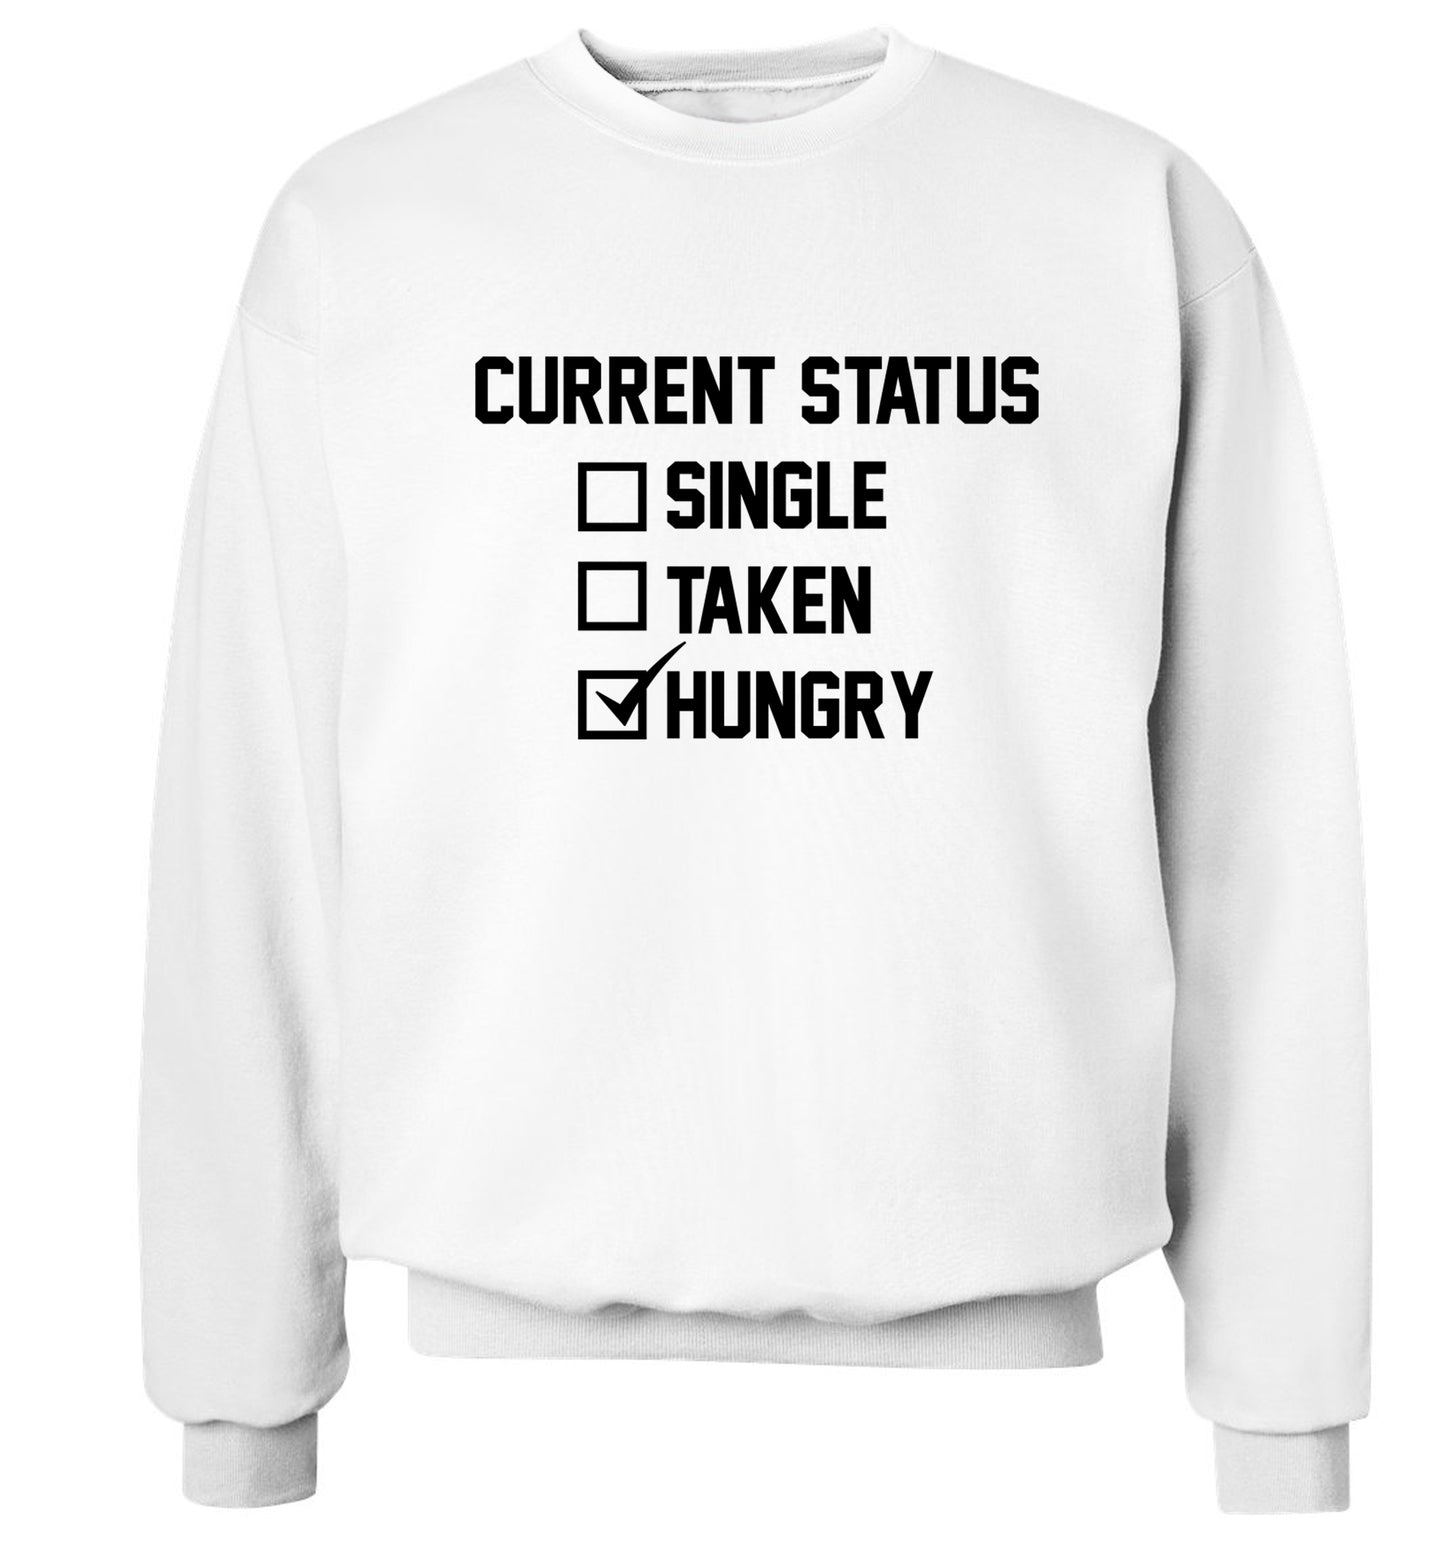 Relationship status single taken hungry Adult's unisex white Sweater 2XL